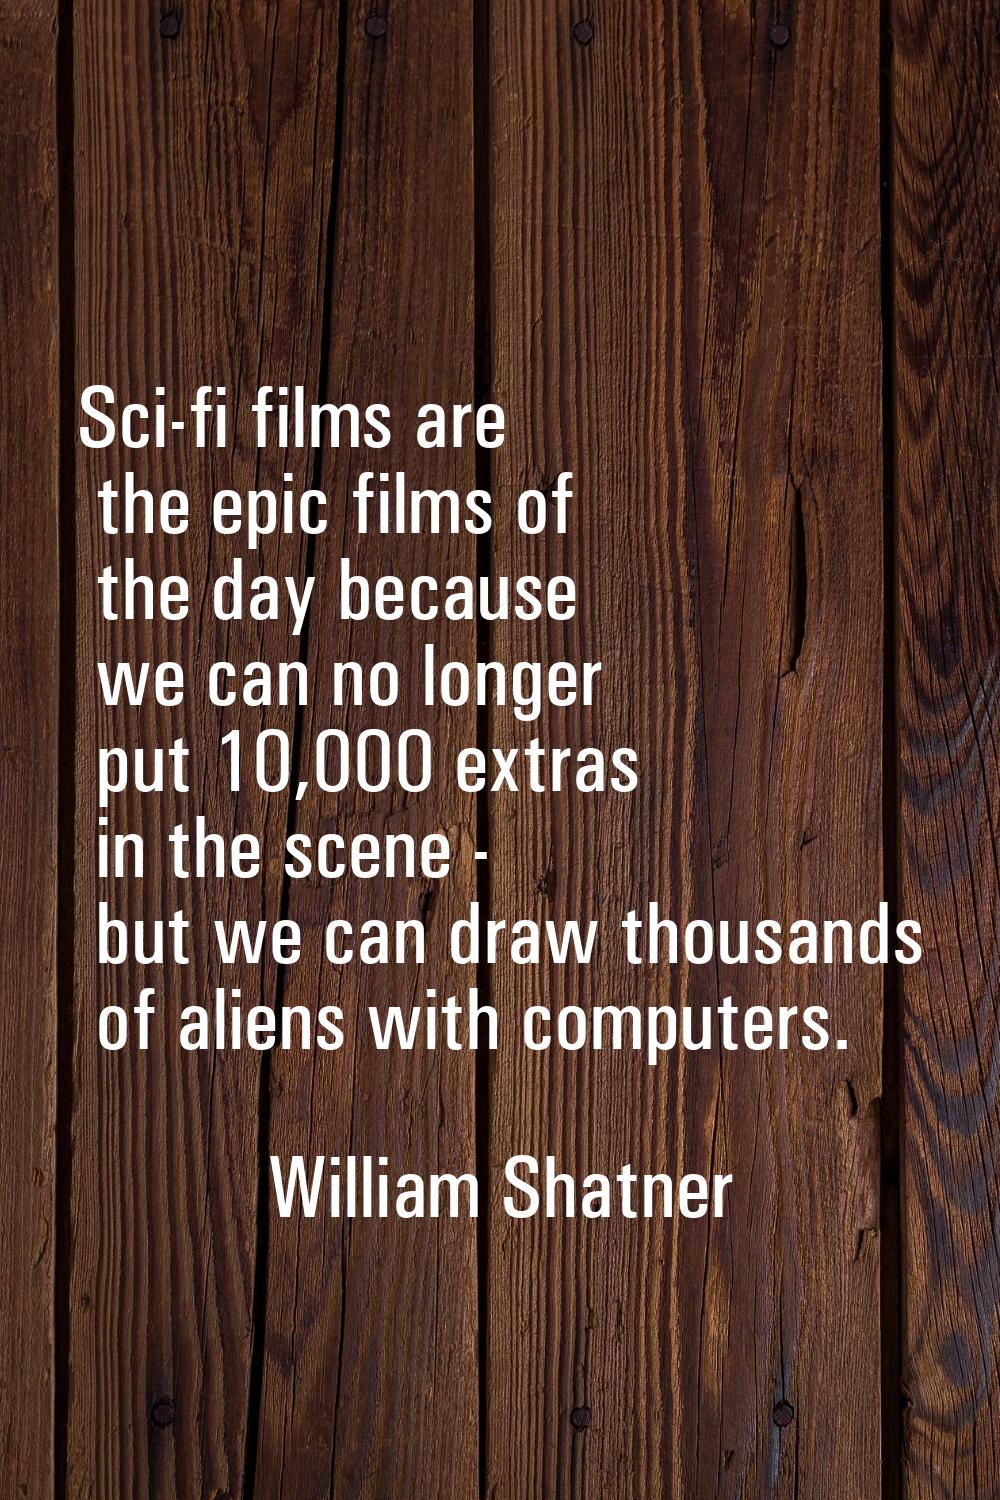 Sci-fi films are the epic films of the day because we can no longer put 10,000 extras in the scene 